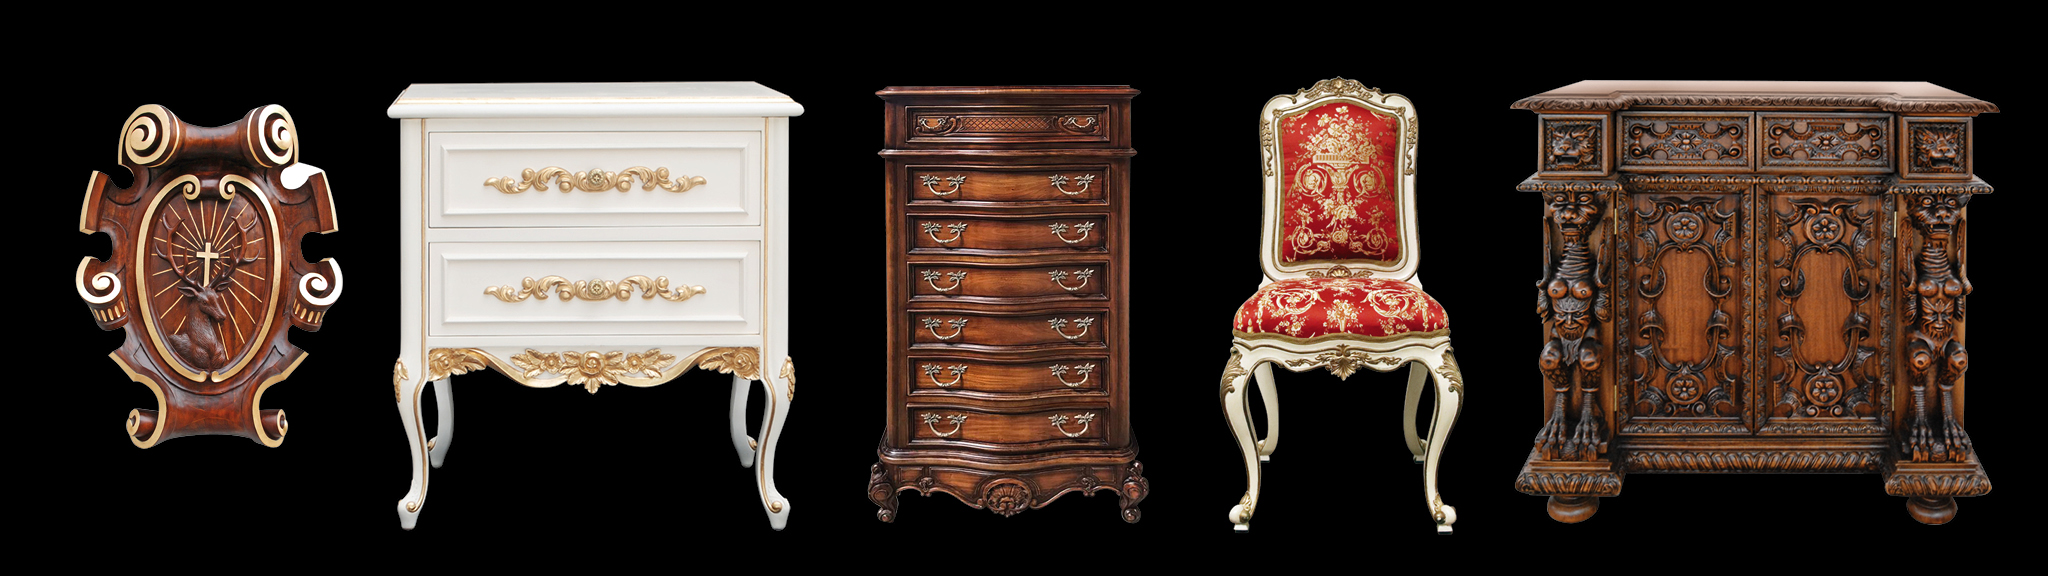 historical furniture. replica of historical furniture. antiques furniture replica